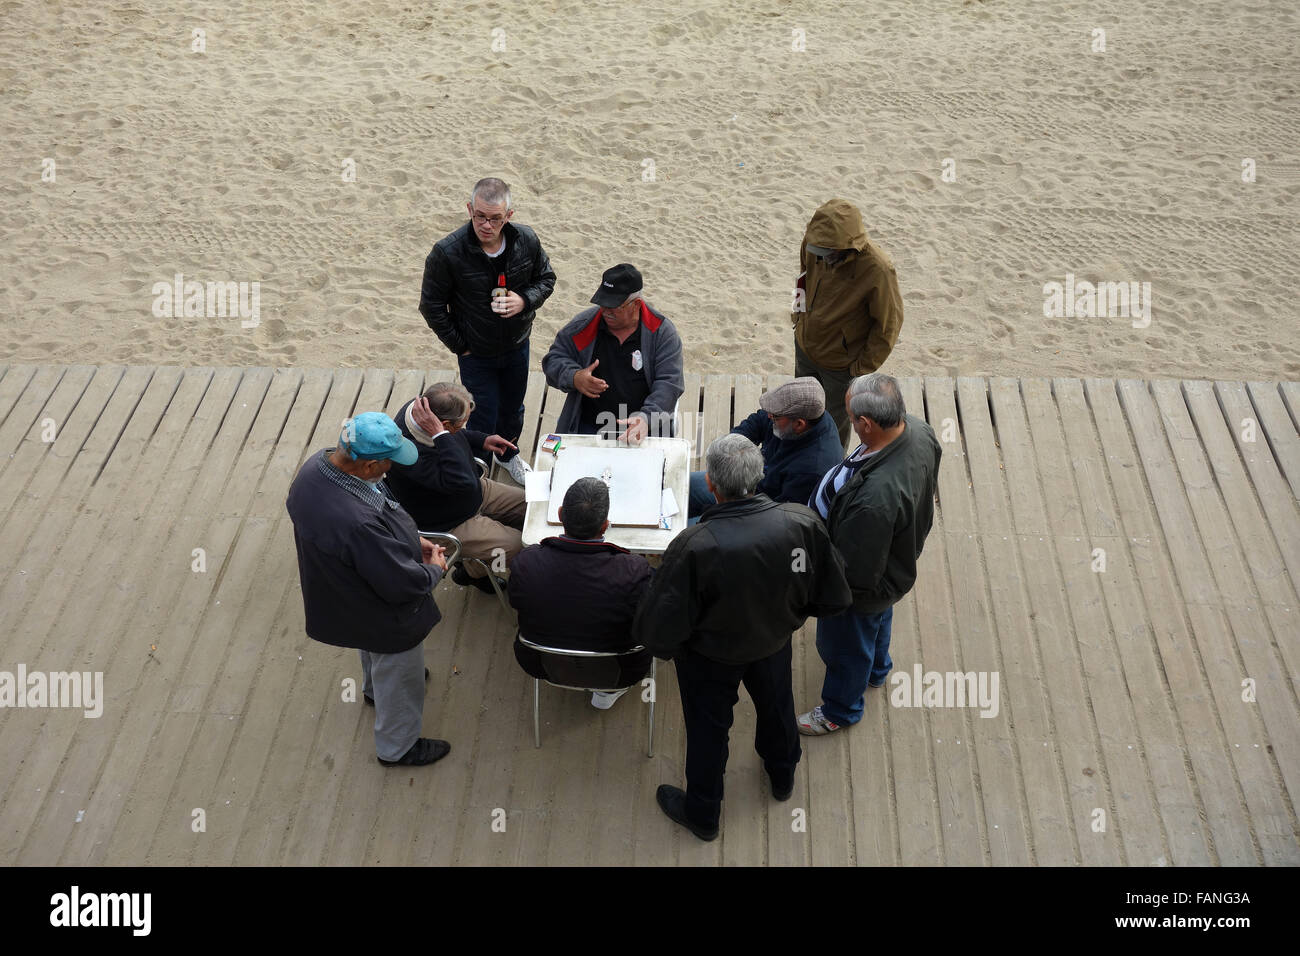 Group of retired men playing dominoes by Barcelona beach Stock Photo